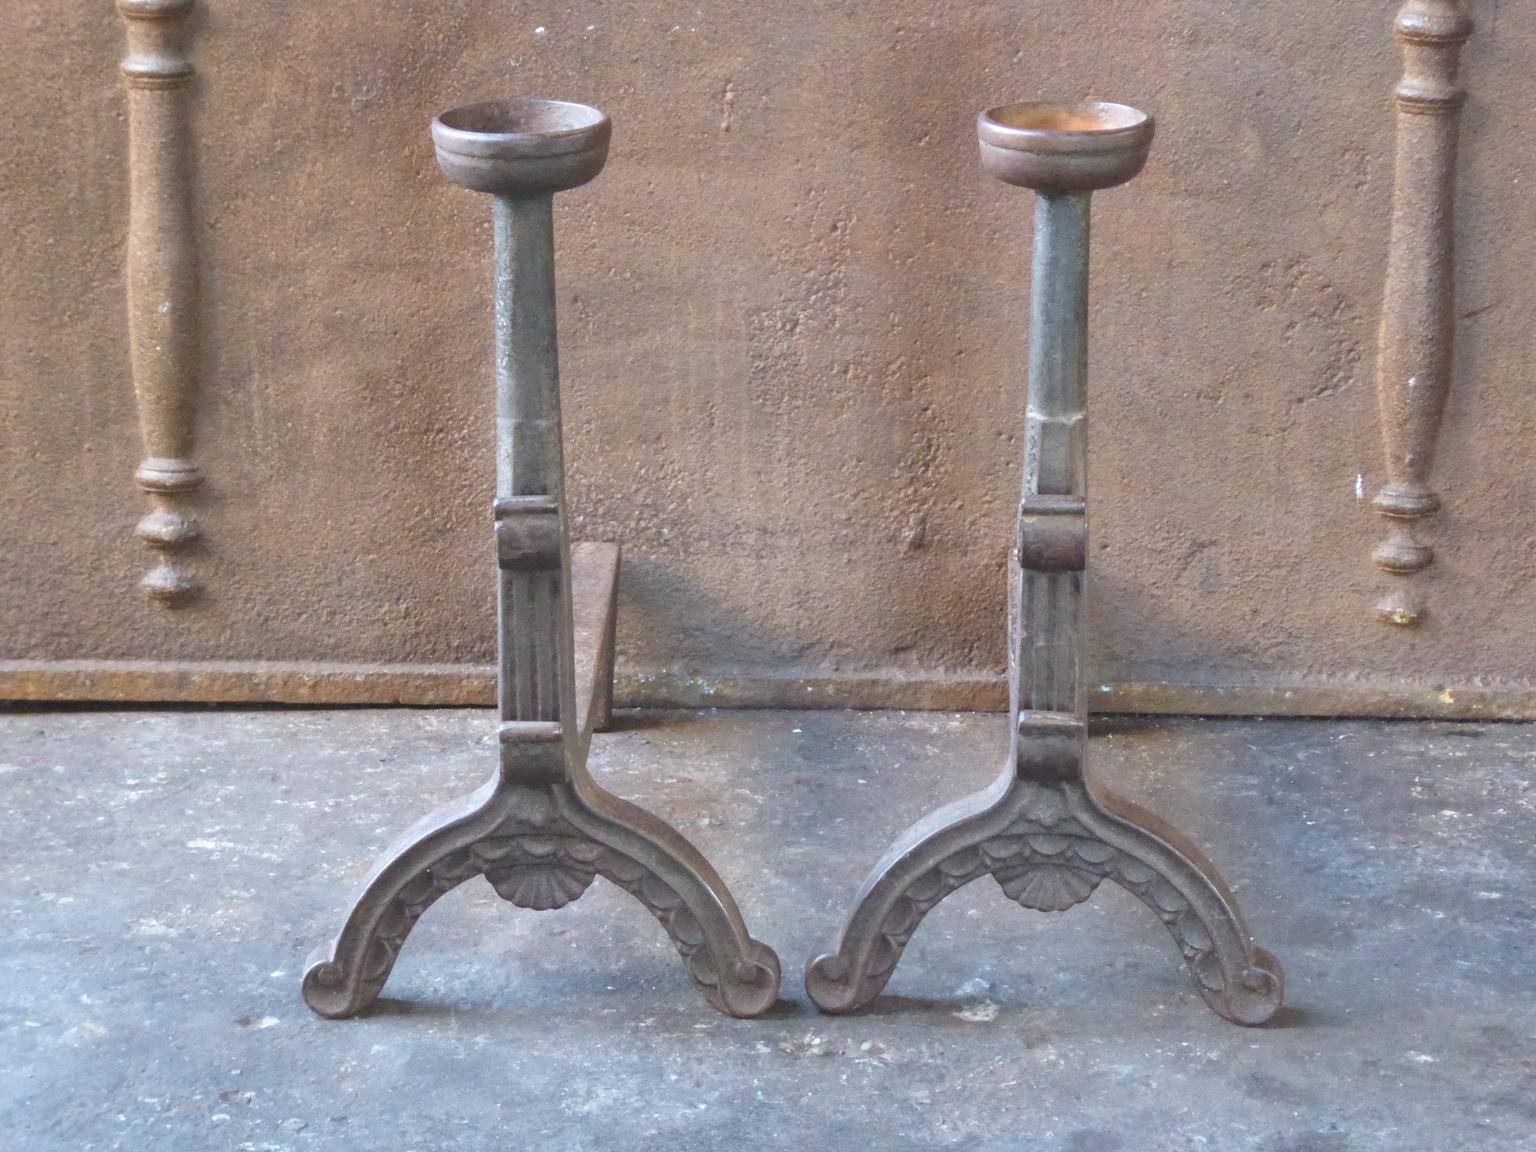 19th-20th century French andirons made of cast iron. The style of the andirons is Gothic. The andirons have spit hooks to grill food and a cup to keep drinks warm. They are in a good condition.